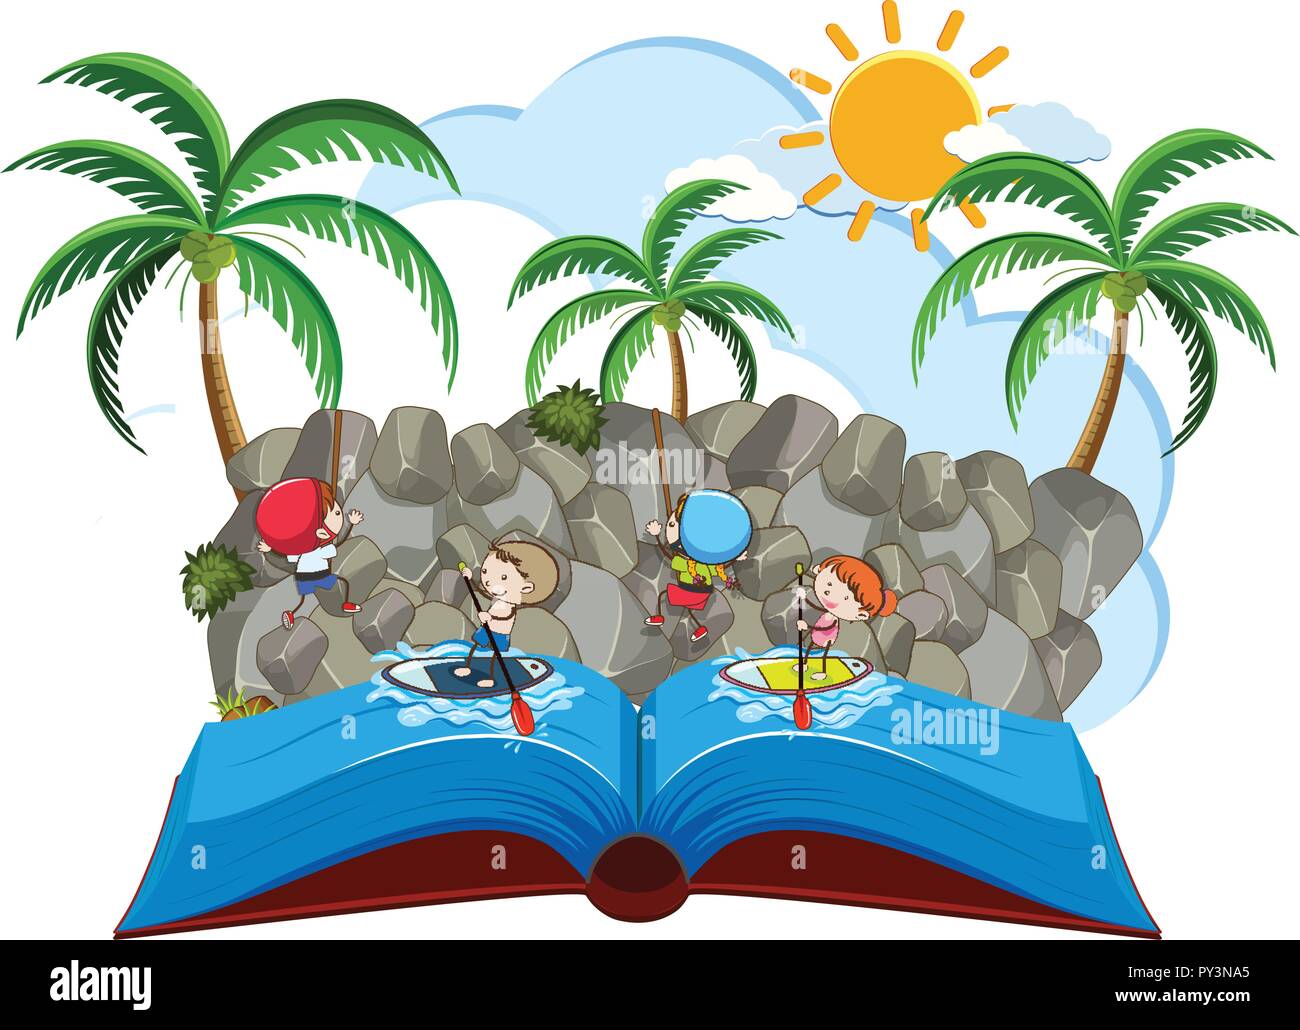 Rock climbing and paddle boarding pop up book illustration Stock Vector